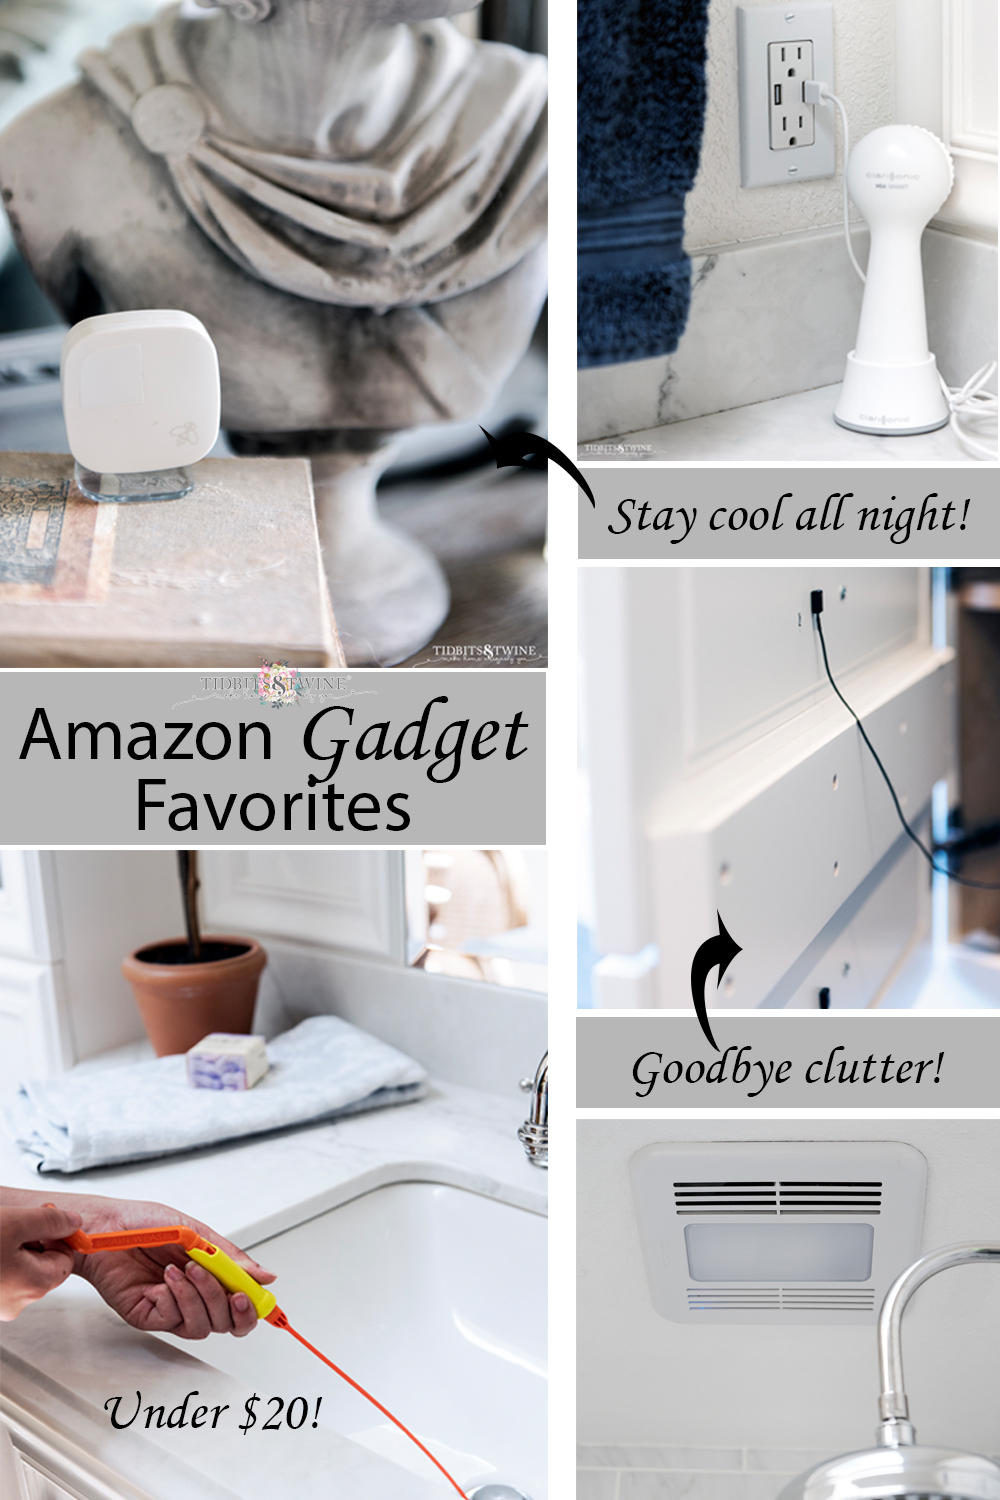 My 12 Favorite Amazon Gadgets for the Home!